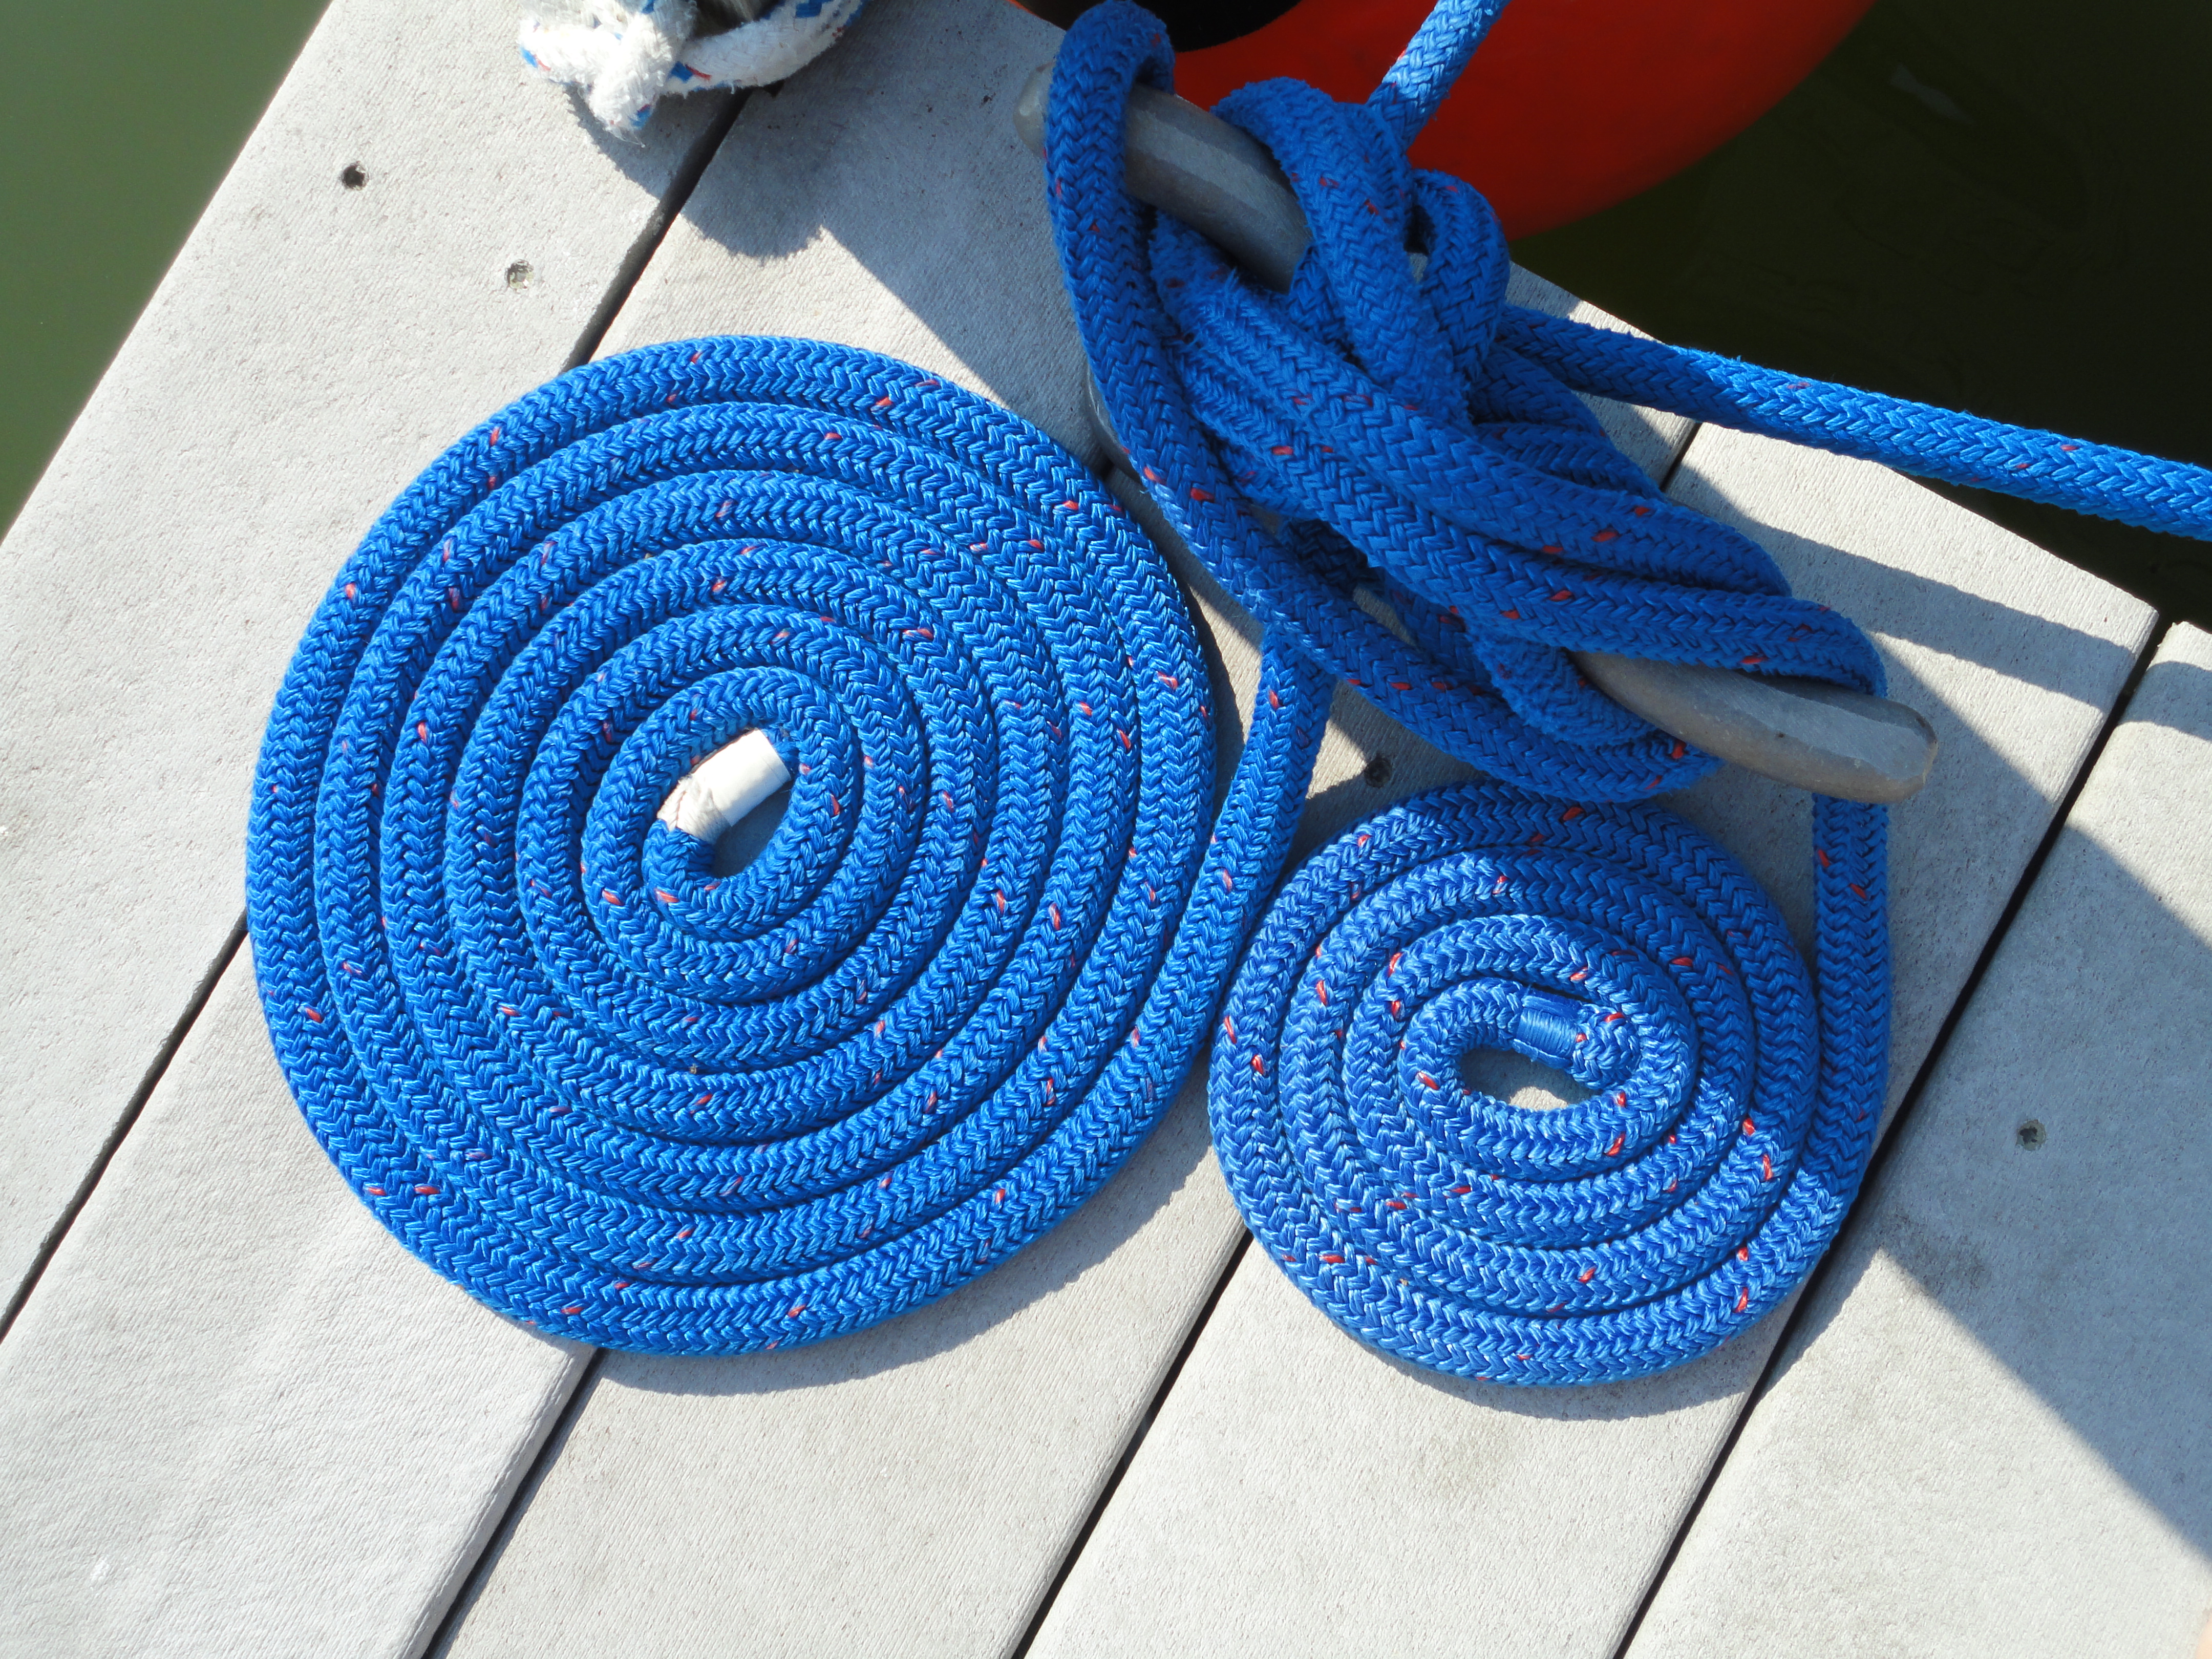 Coiled blue dock lines